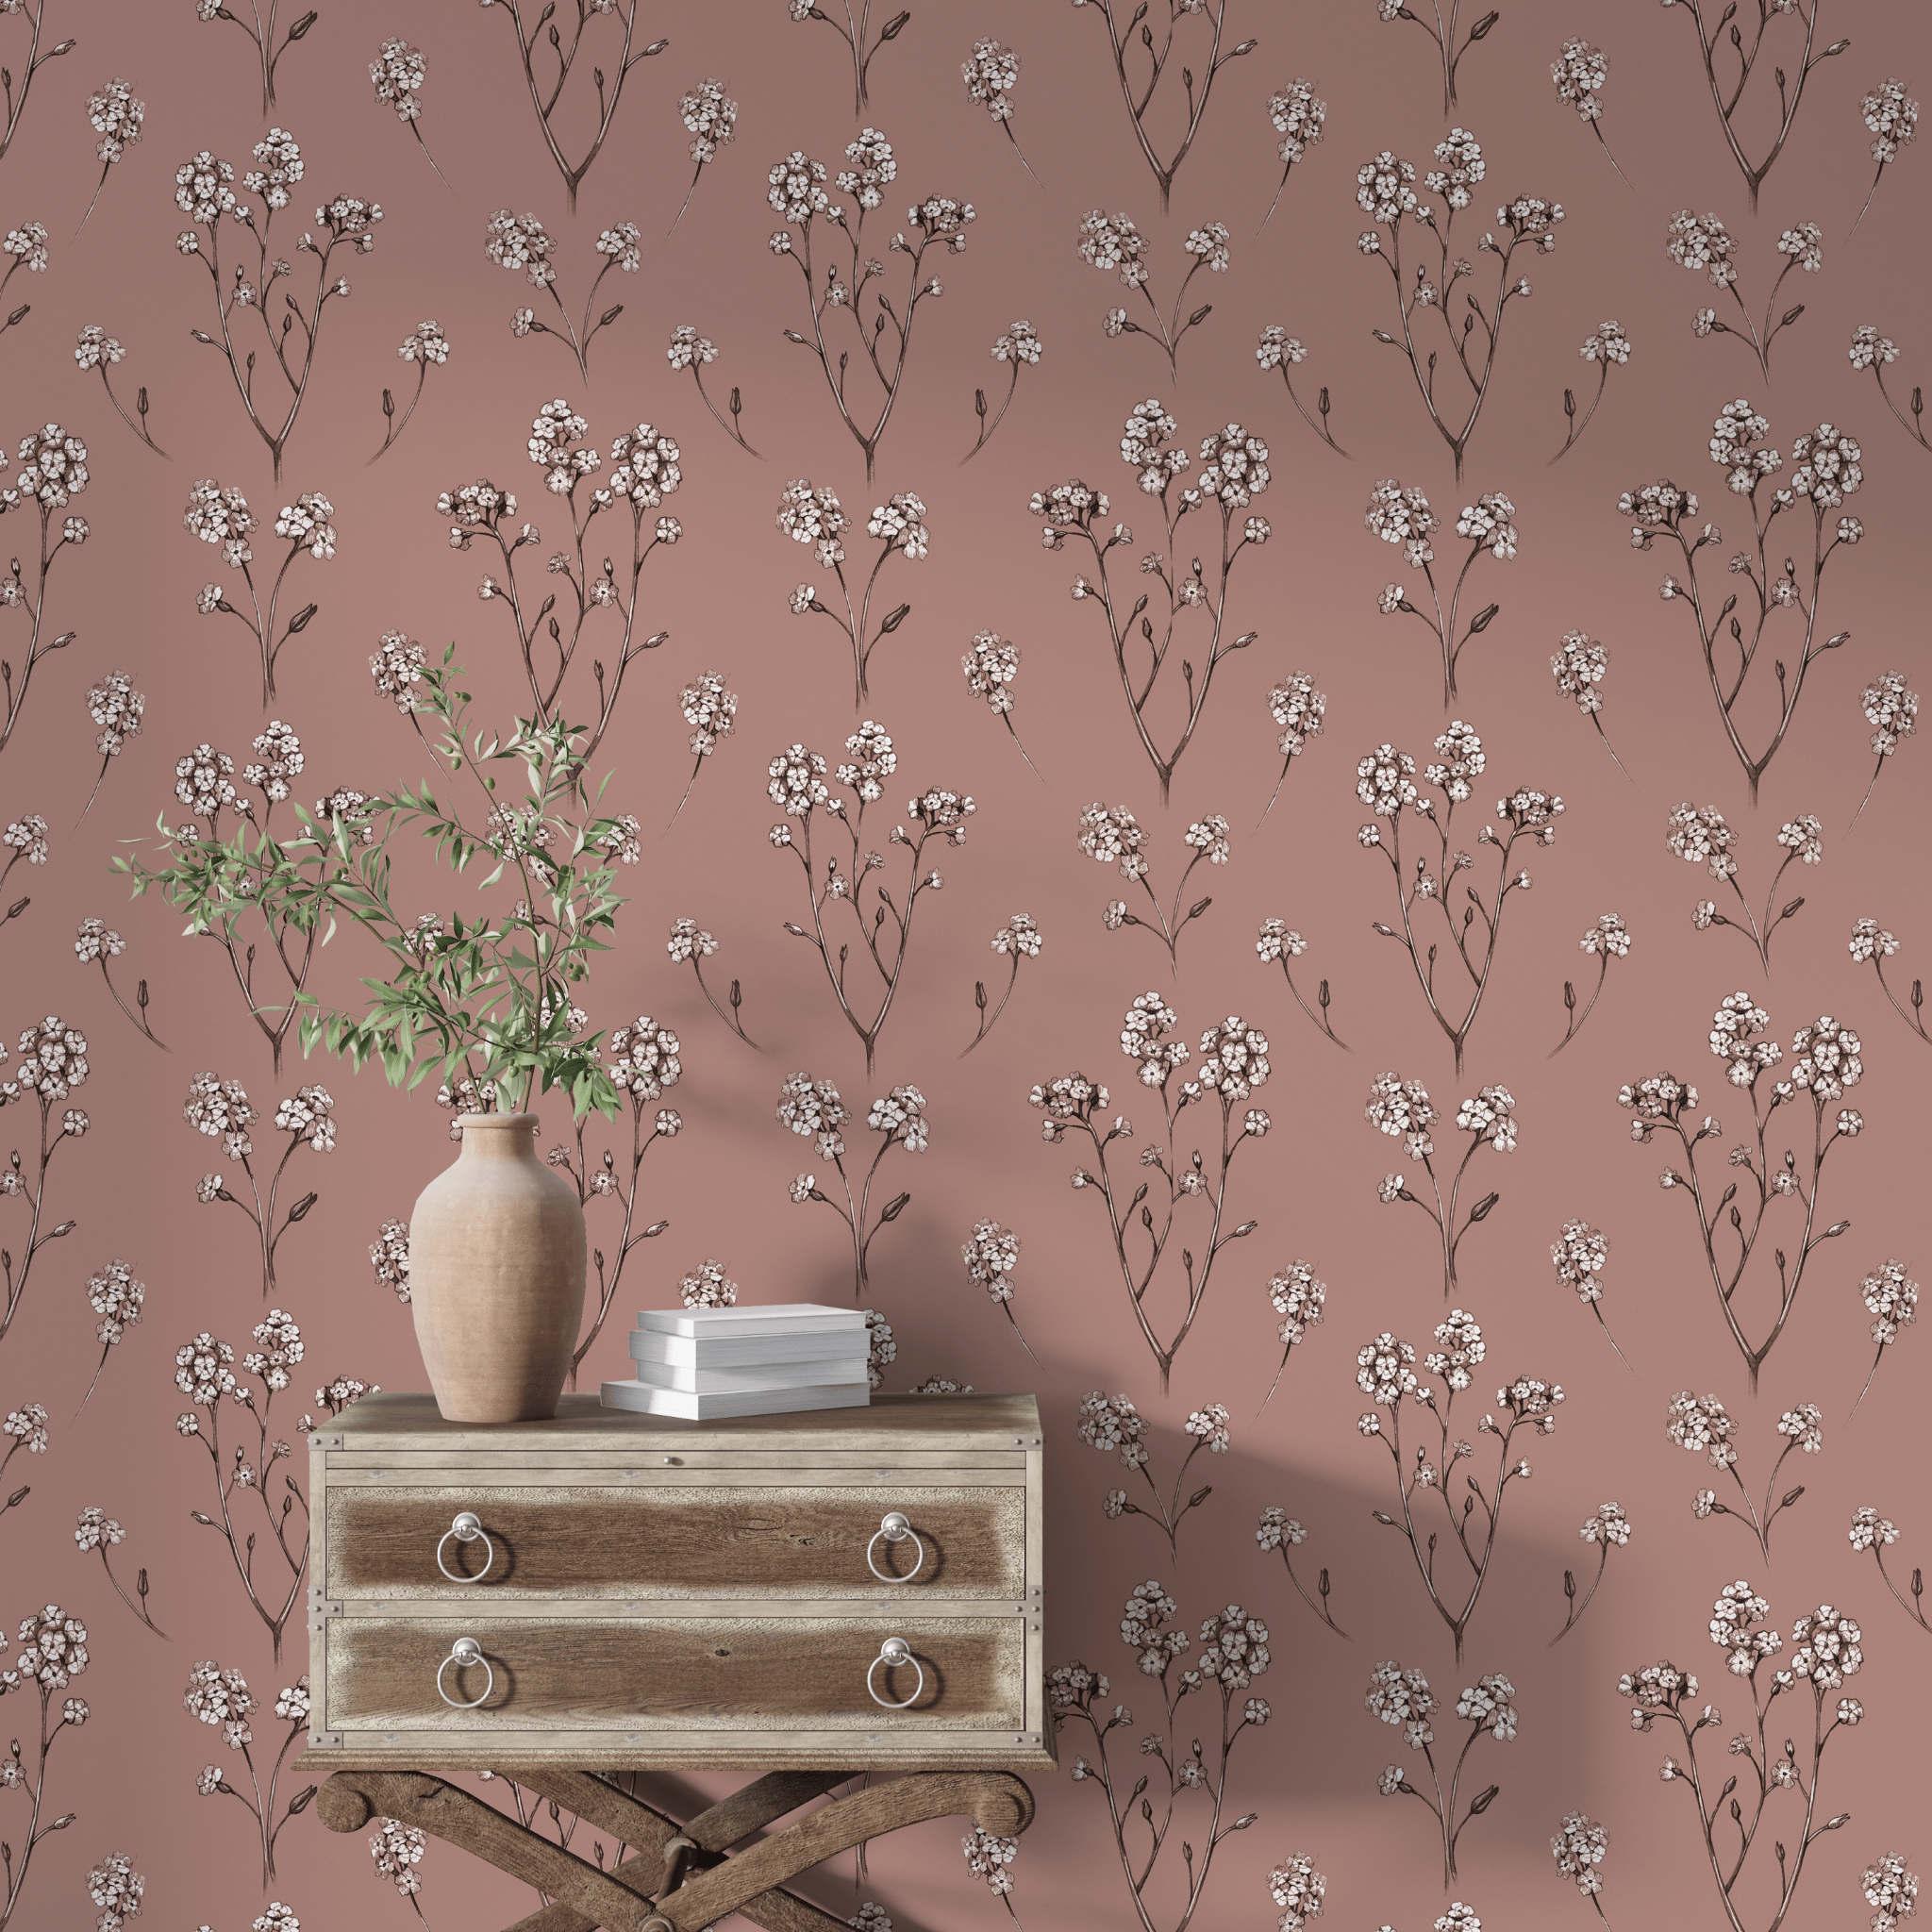 An elegant boho terracotta-colored wallpaper with a thornhill floral pattern in a room setting with decor.